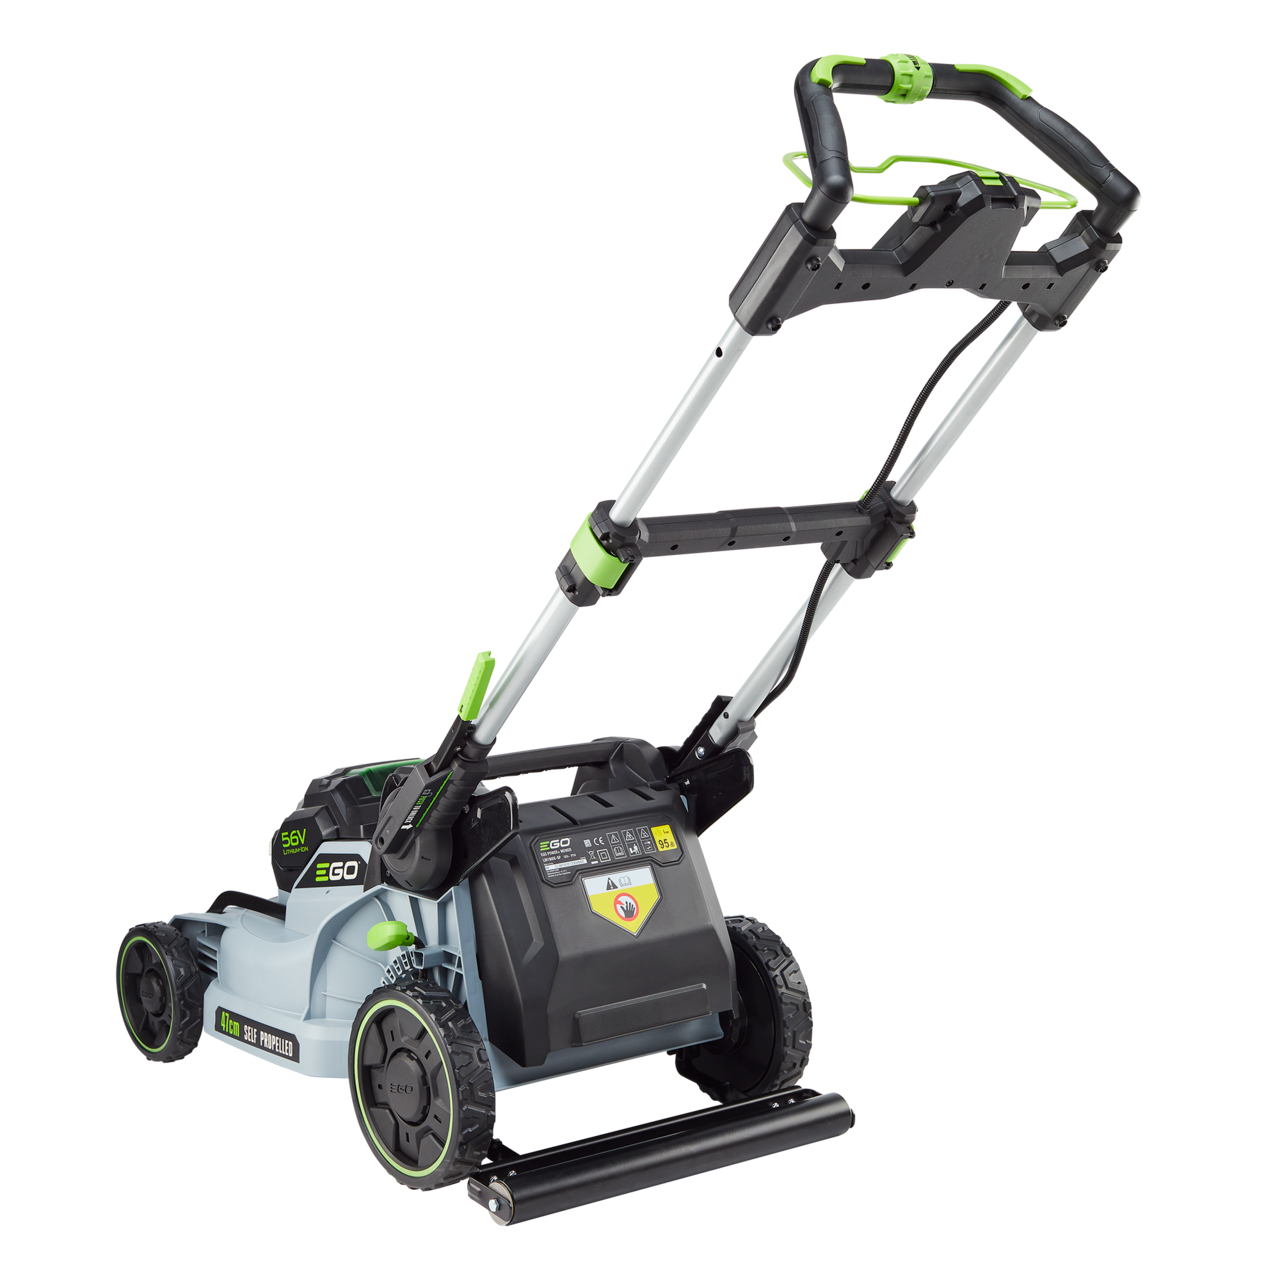 Image of Lawn mower with rear roller for stripes